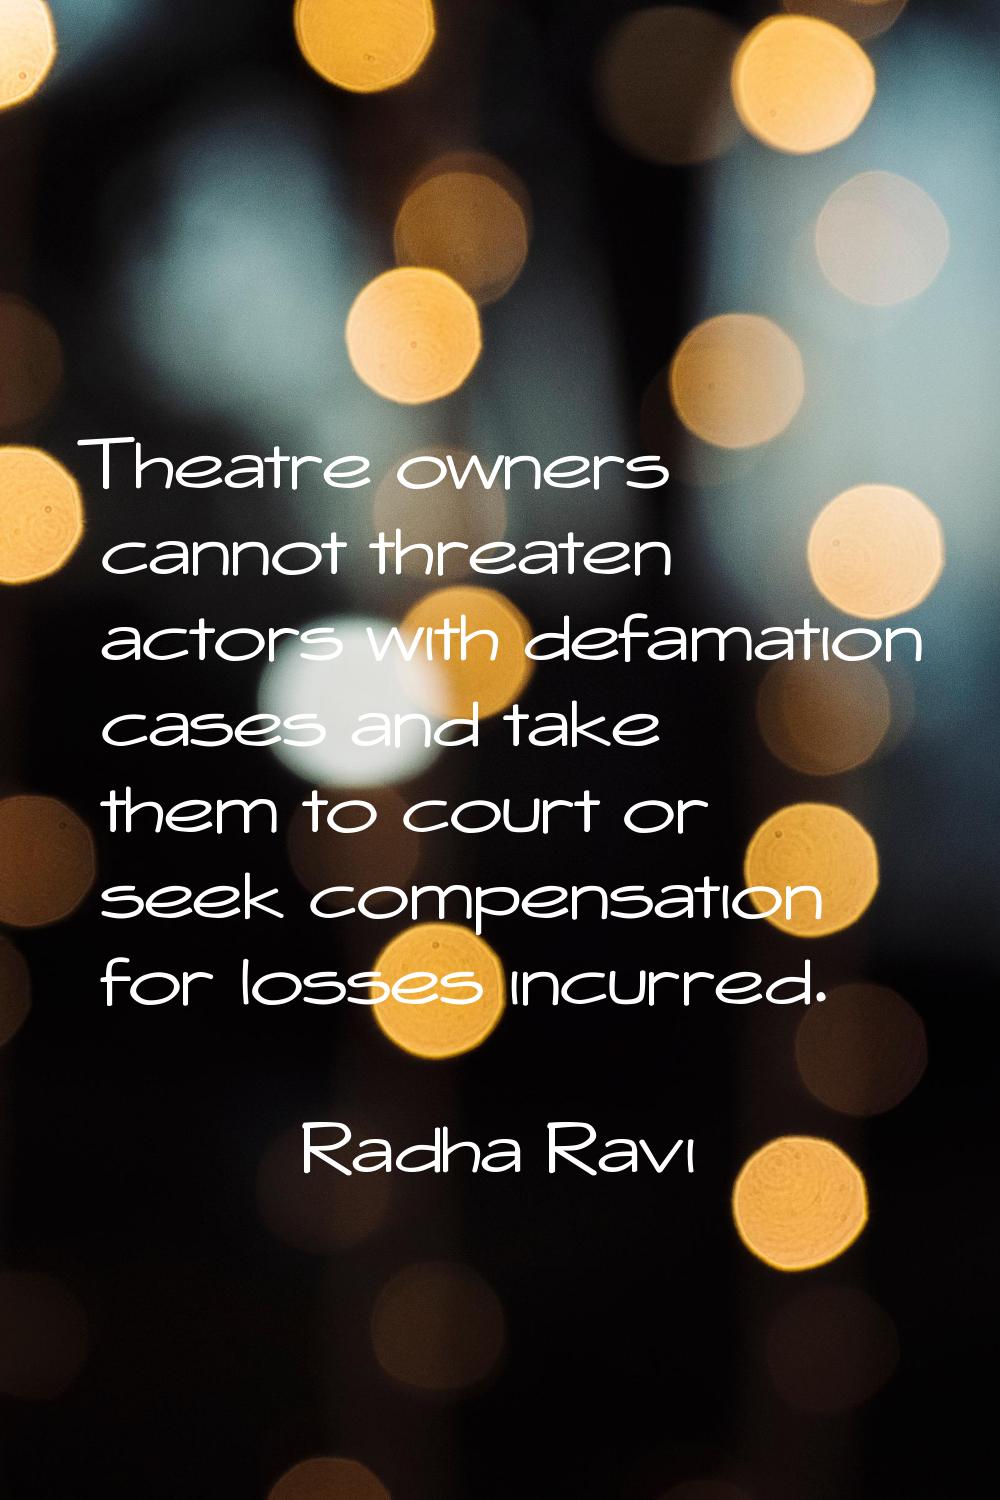 Theatre owners cannot threaten actors with defamation cases and take them to court or seek compensa